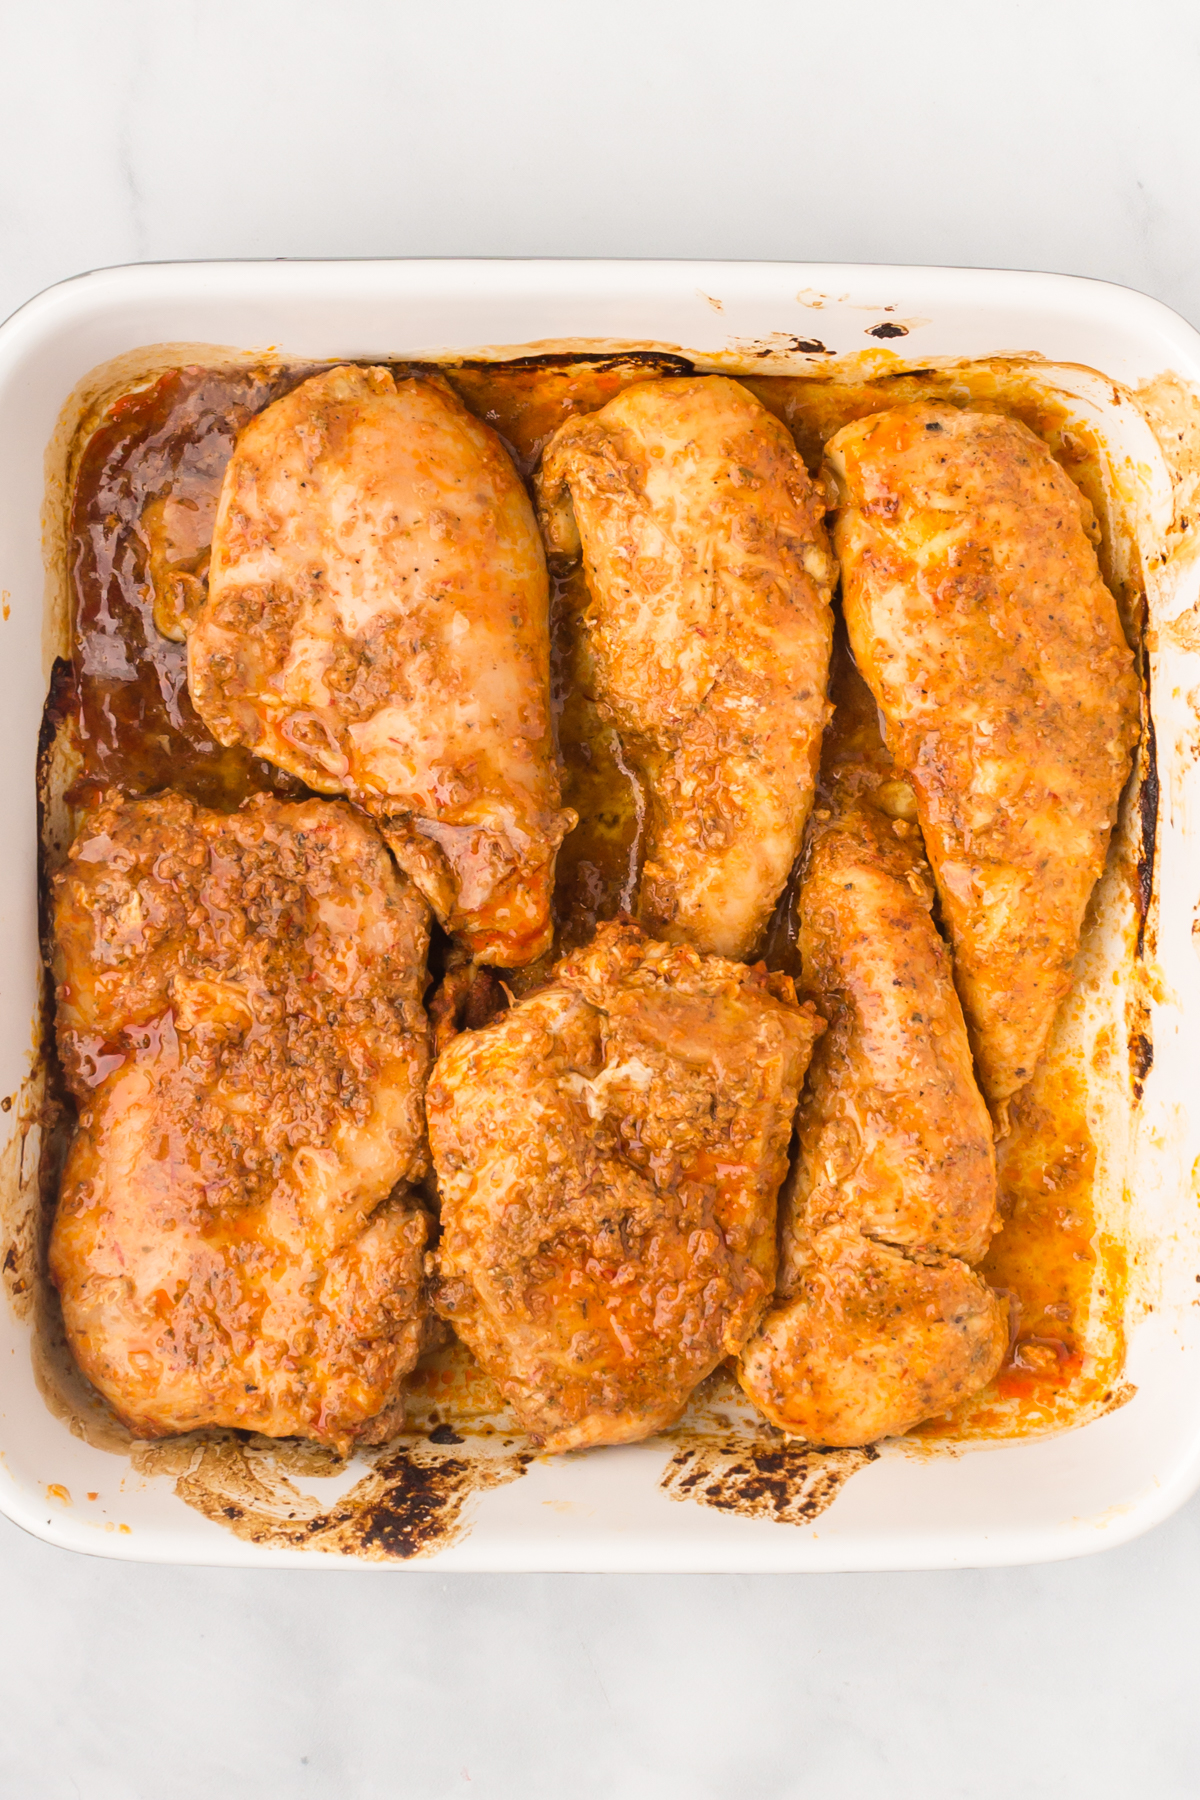 baked chipotle chicken in a baking dish